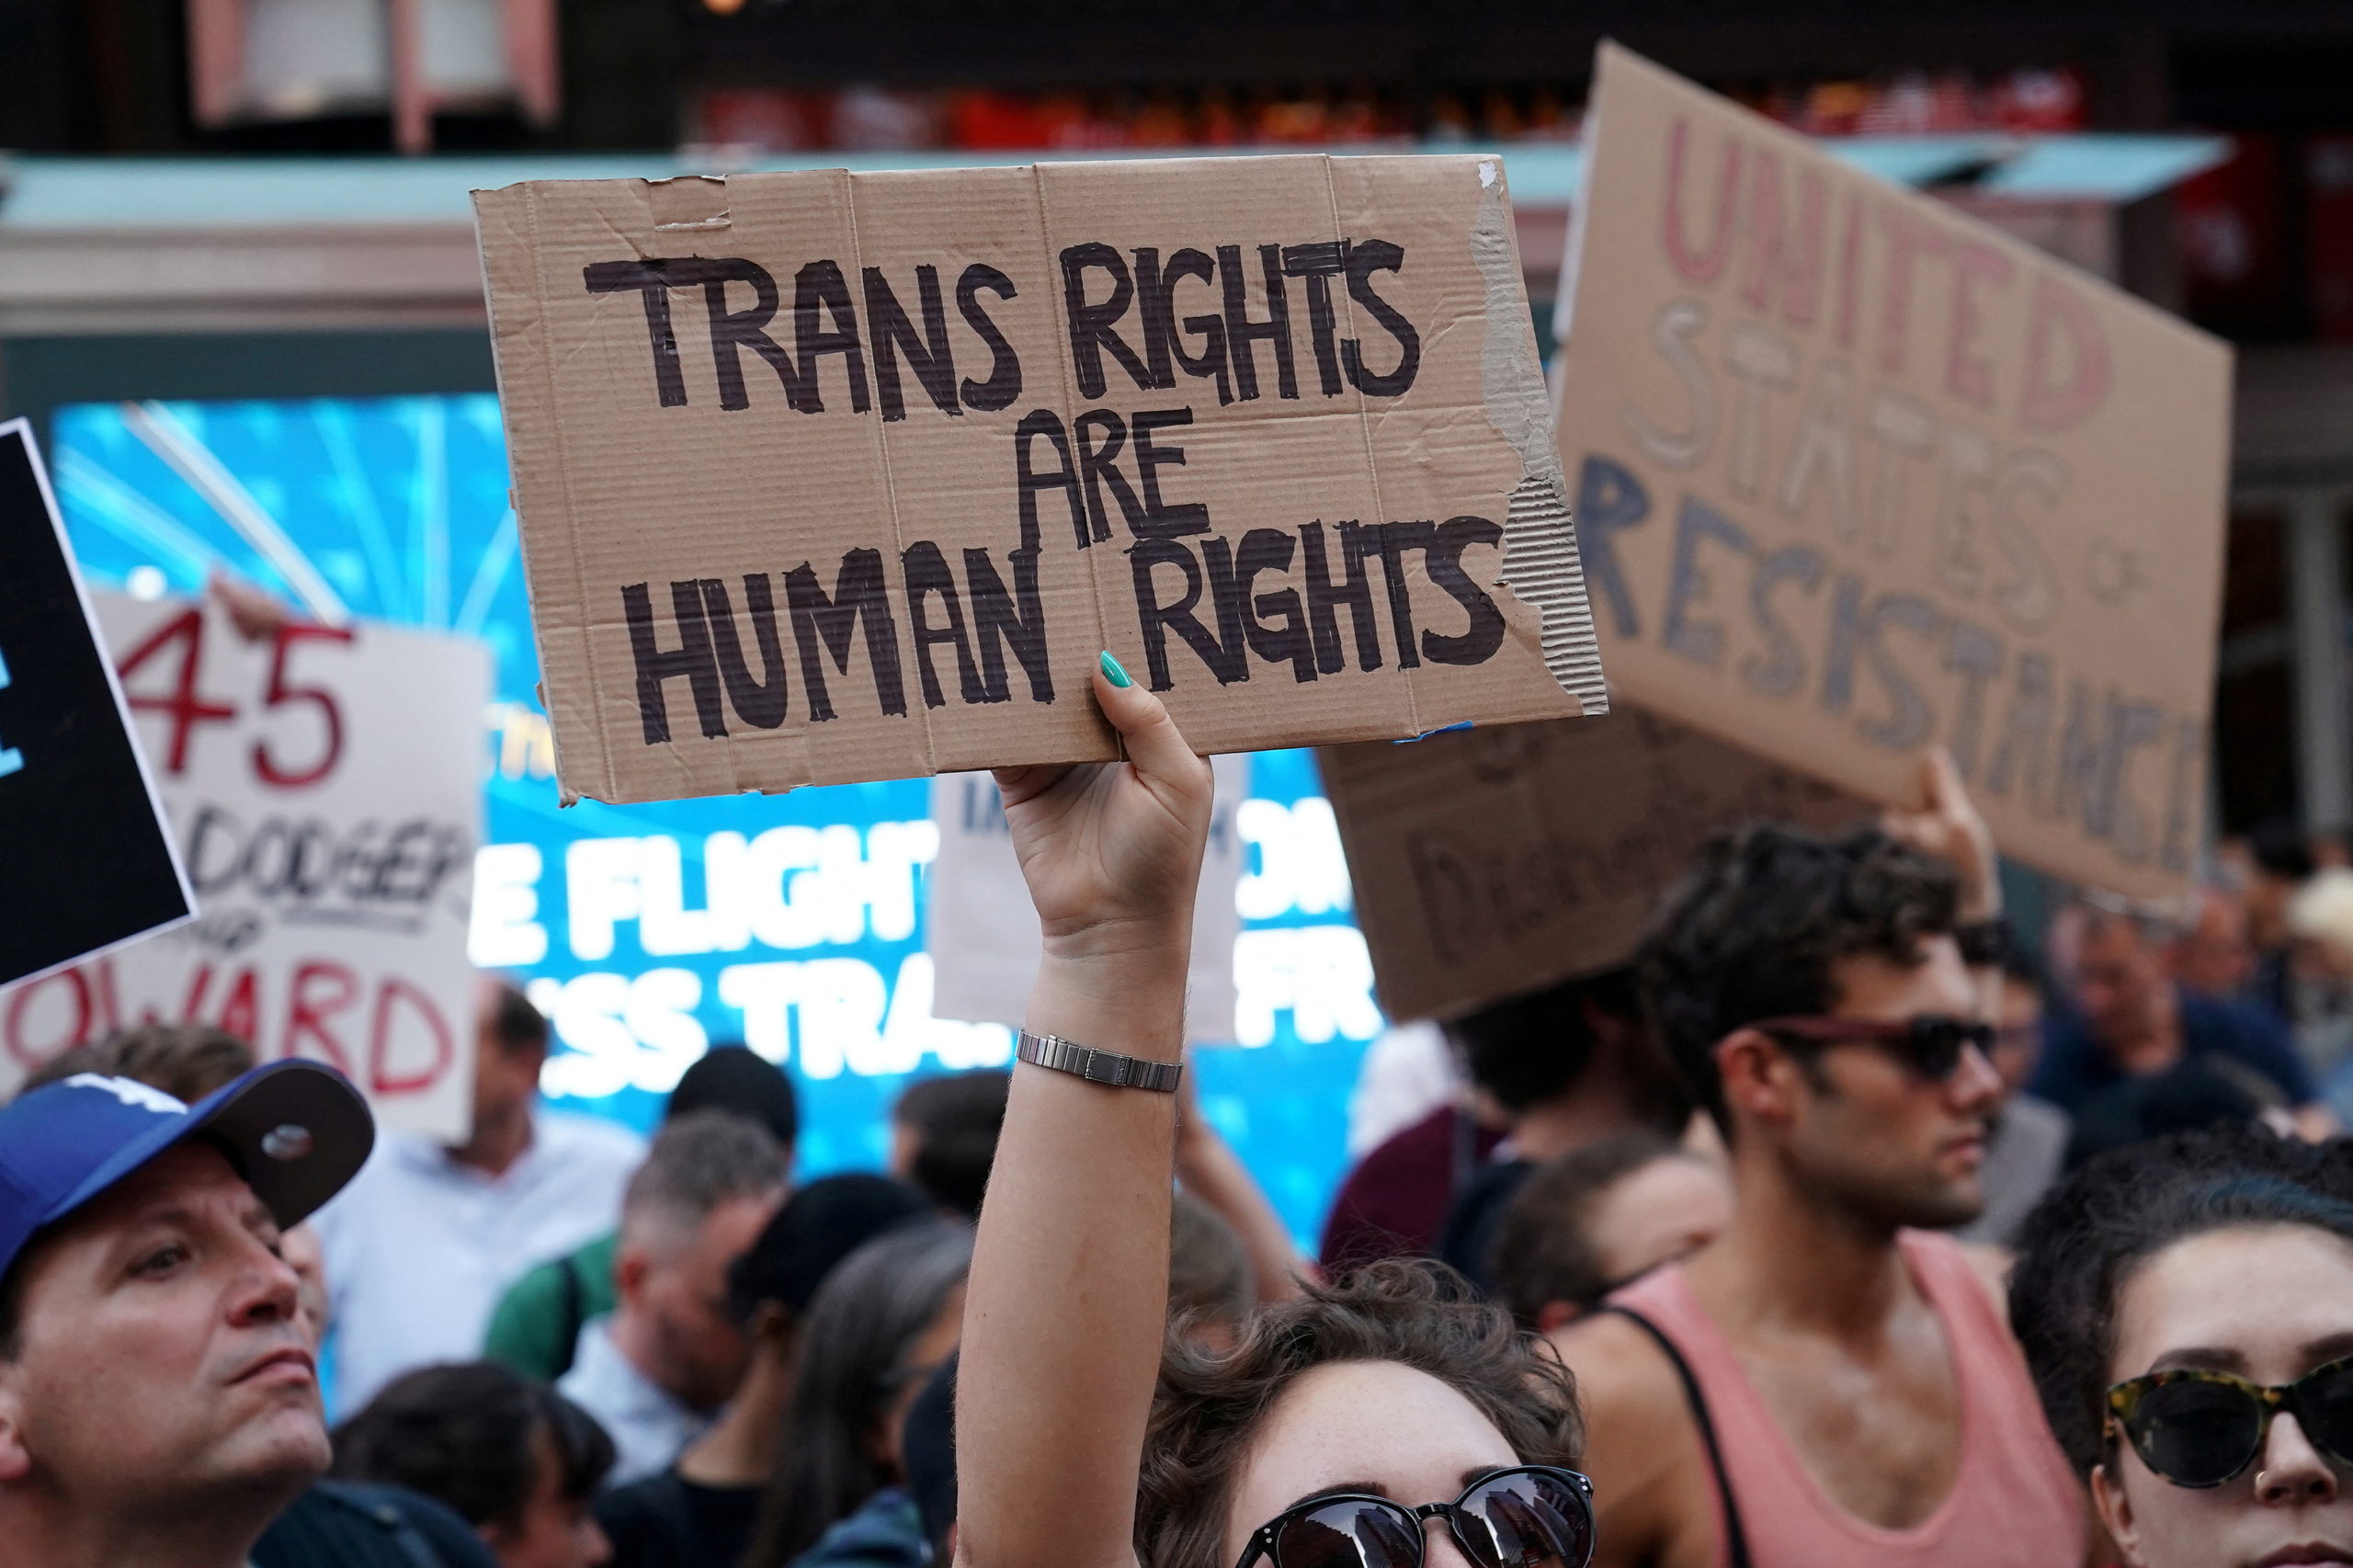 FILE PHOTO: People protest U.S. President Donald Trump's announcement that he plans to reinstate a ban on transgender individuals from serving in any capacity in the U.S. military, in Times Square, in New York City, New York, U.S., July 26, 2017. REUTERS/Carlo Allegri/File Photo